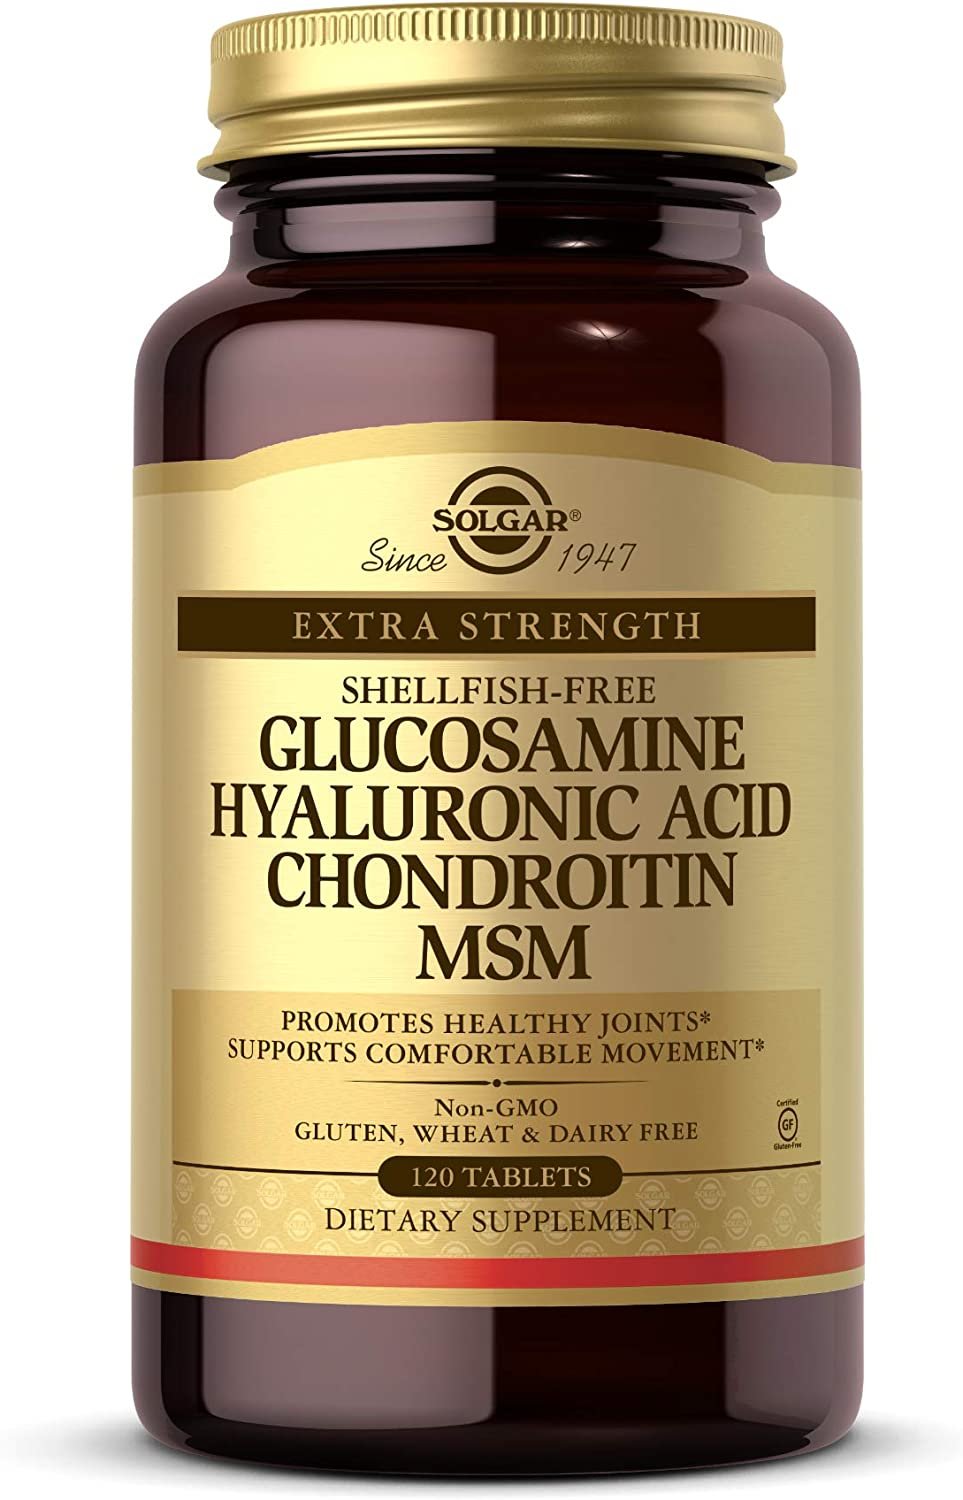 Solgar Glucosamine Hyaluronic Acid Chondroitin MSM - Joint Support 120 ct